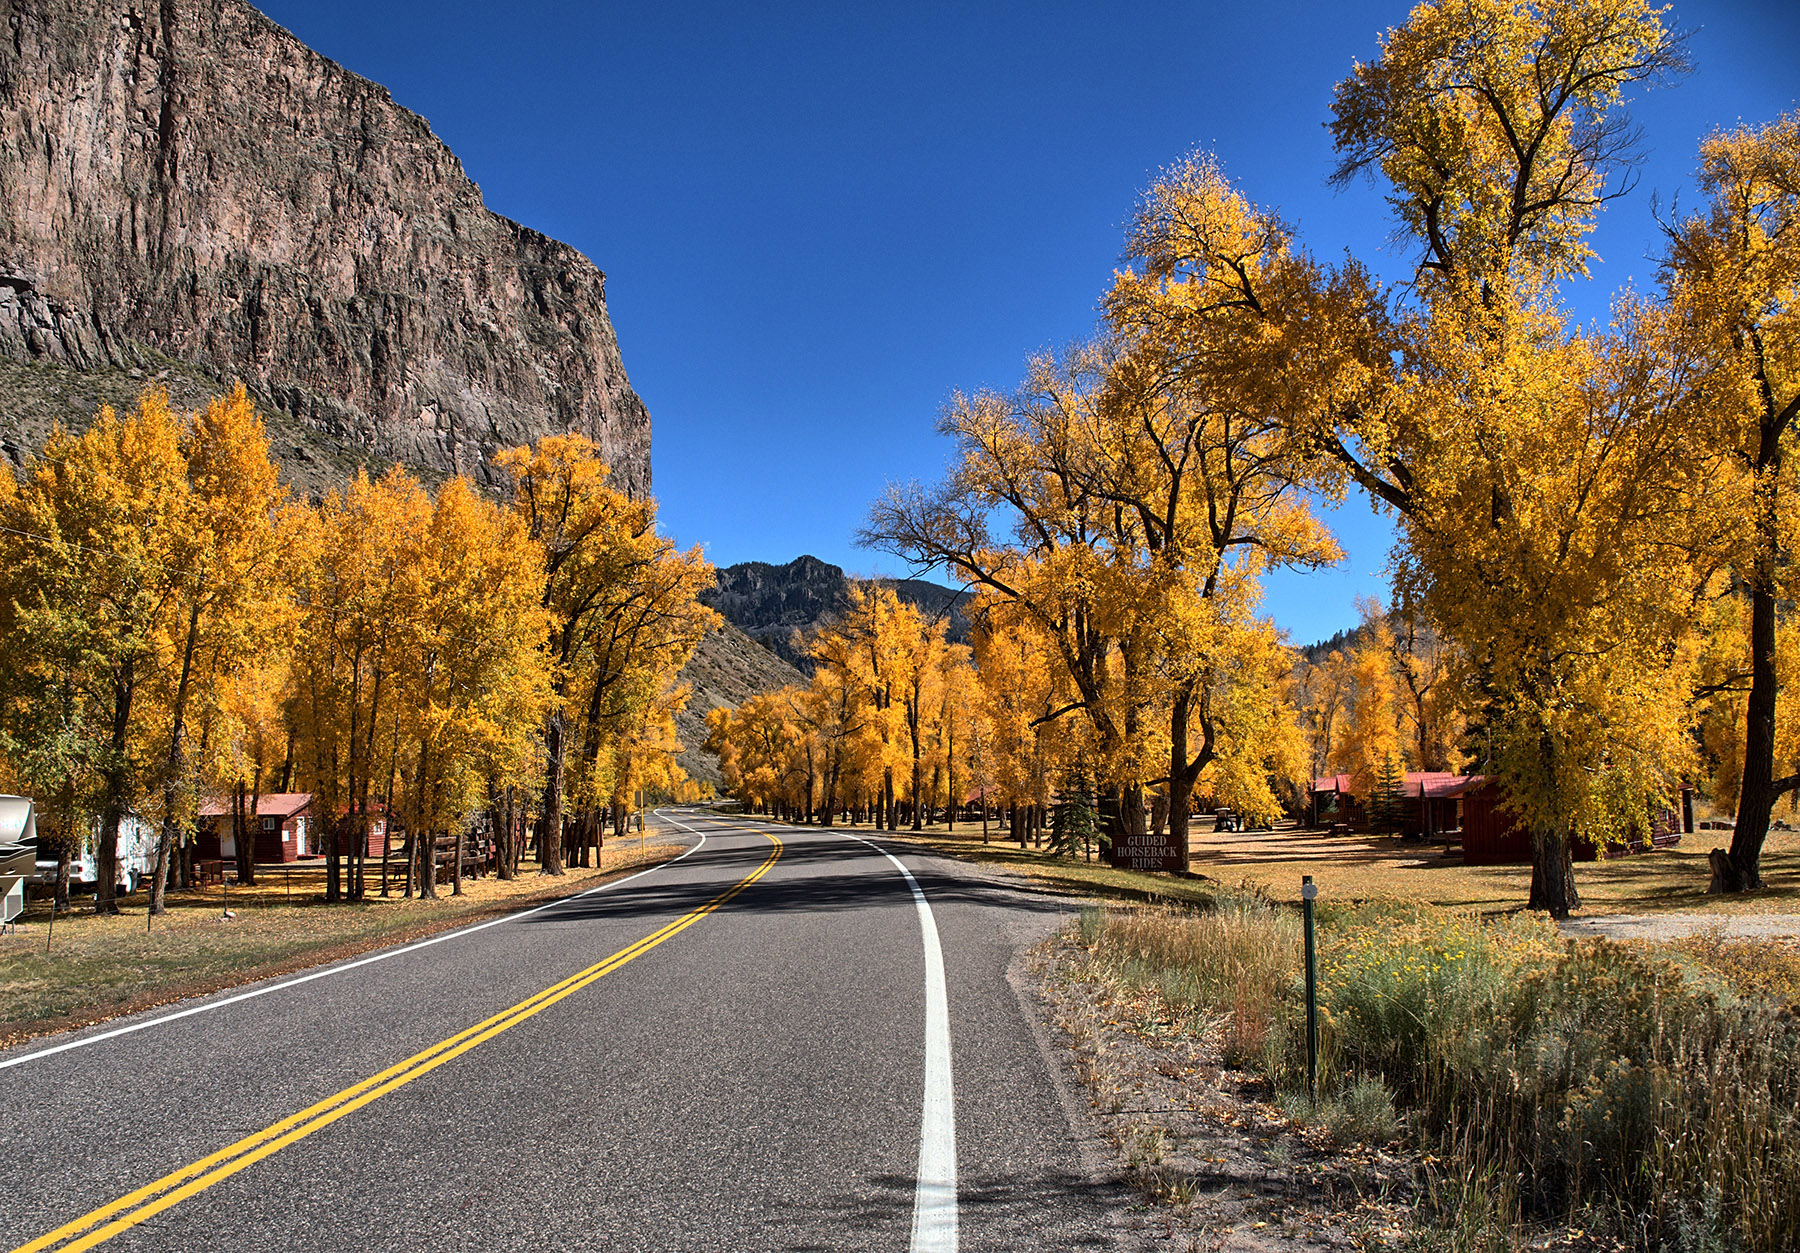 Hwy 149 passes through a cottonwood grove with the Creede Caldera rim on the left.